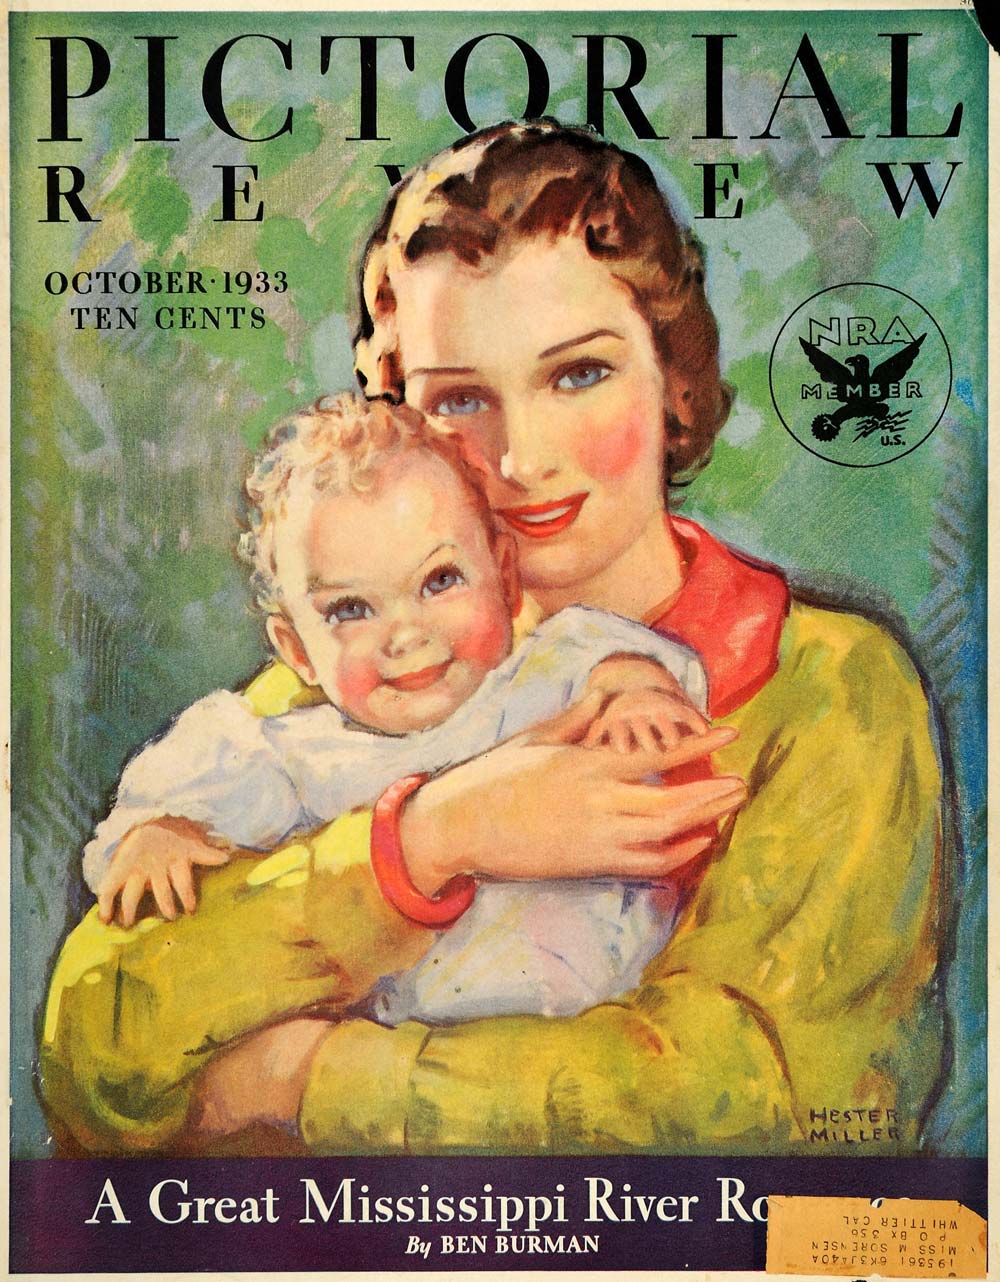 1933 Cover Pictorial Review Magazine October Mother Child Hester Miller NRA PR2